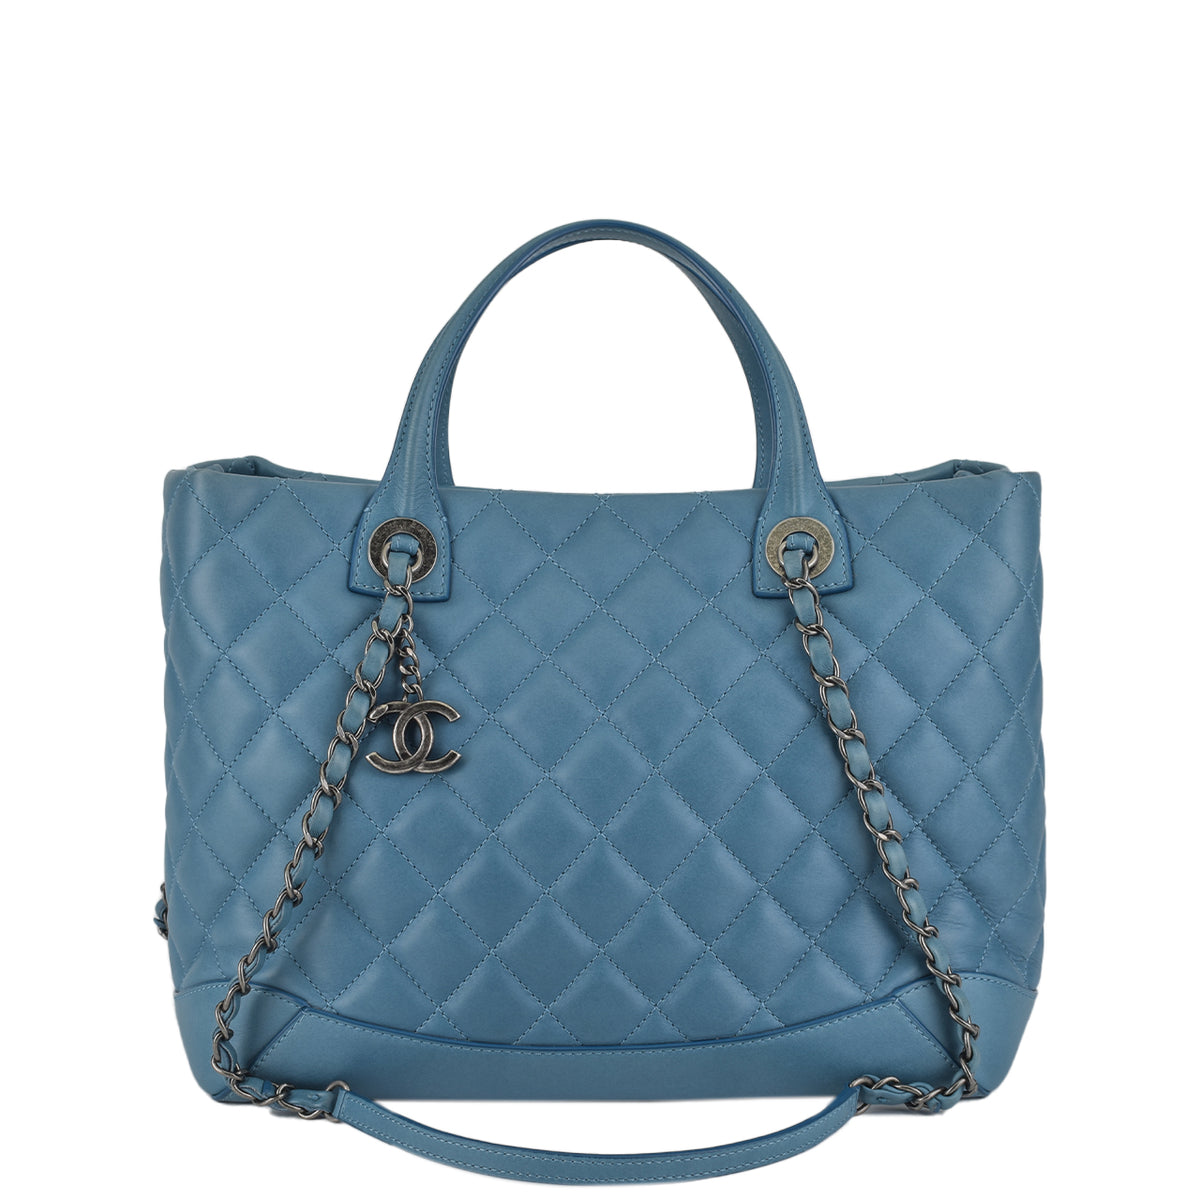 Chanel Light Blue Quilted Caviar Top Handle Vanity Case - Handbag | Pre-owned & Certified | used Second Hand | Unisex